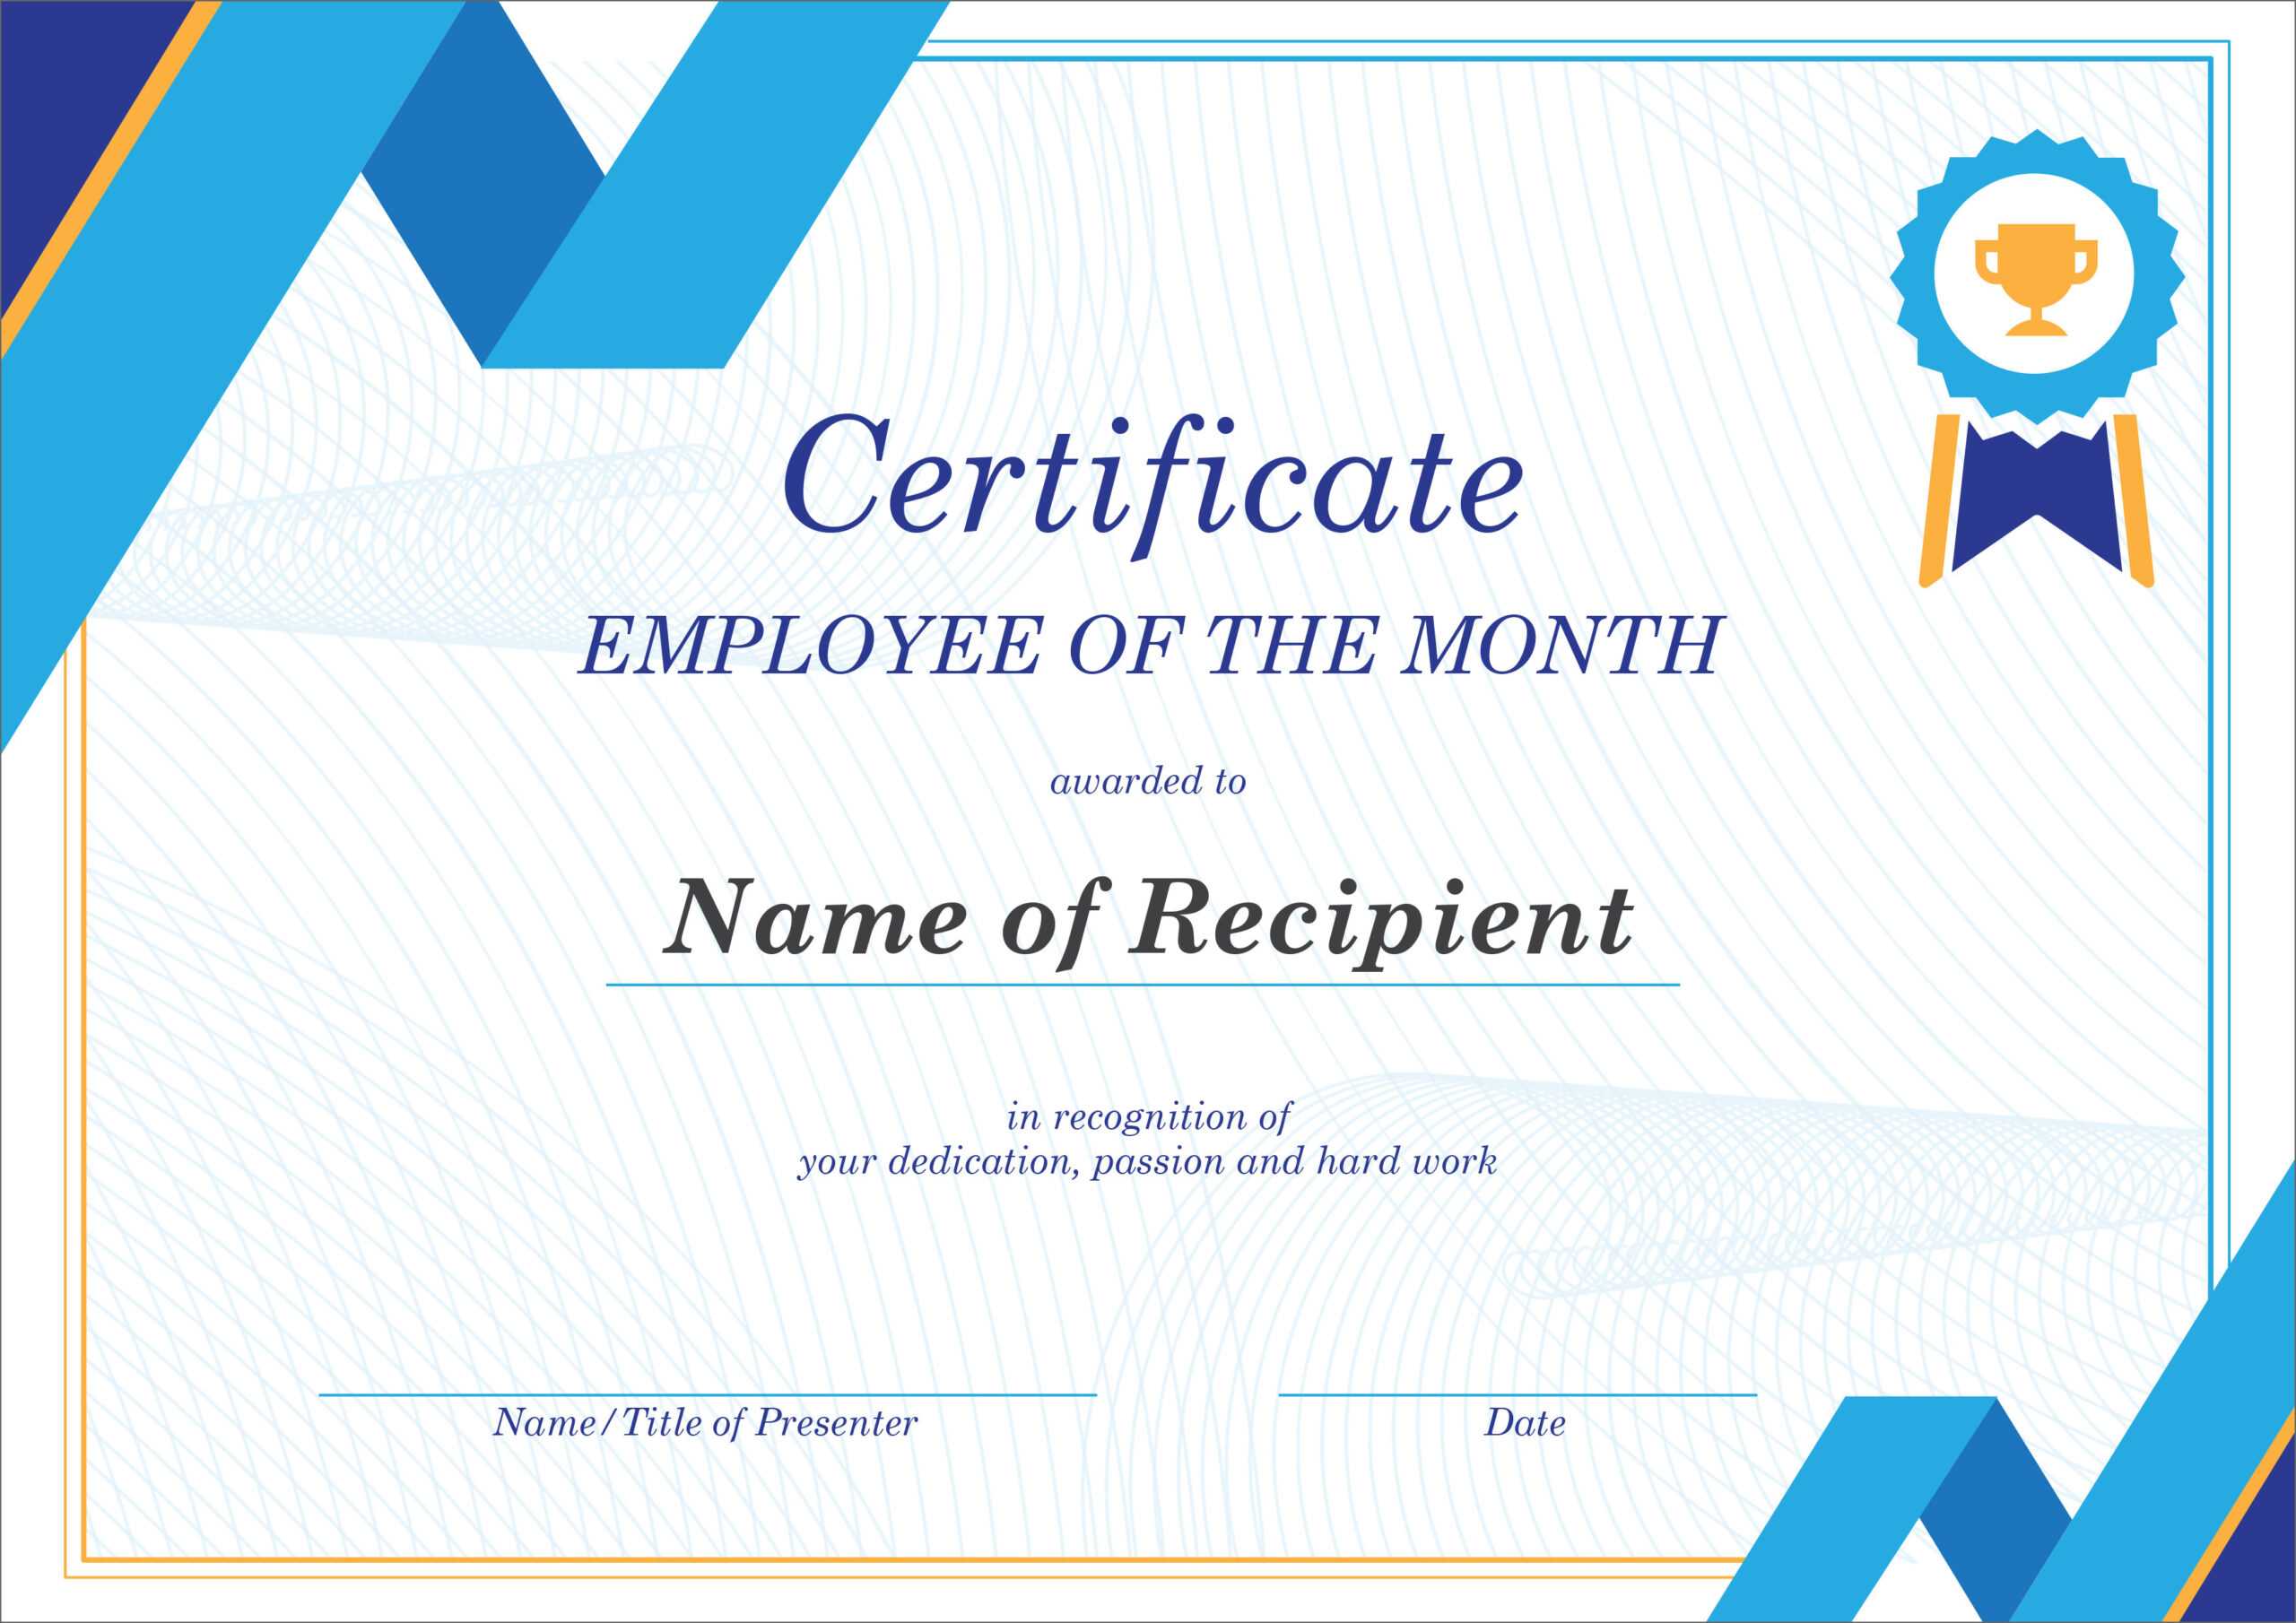 50 Free Creative Blank Certificate Templates In Psd For Employee Recognition Certificates Templates Free